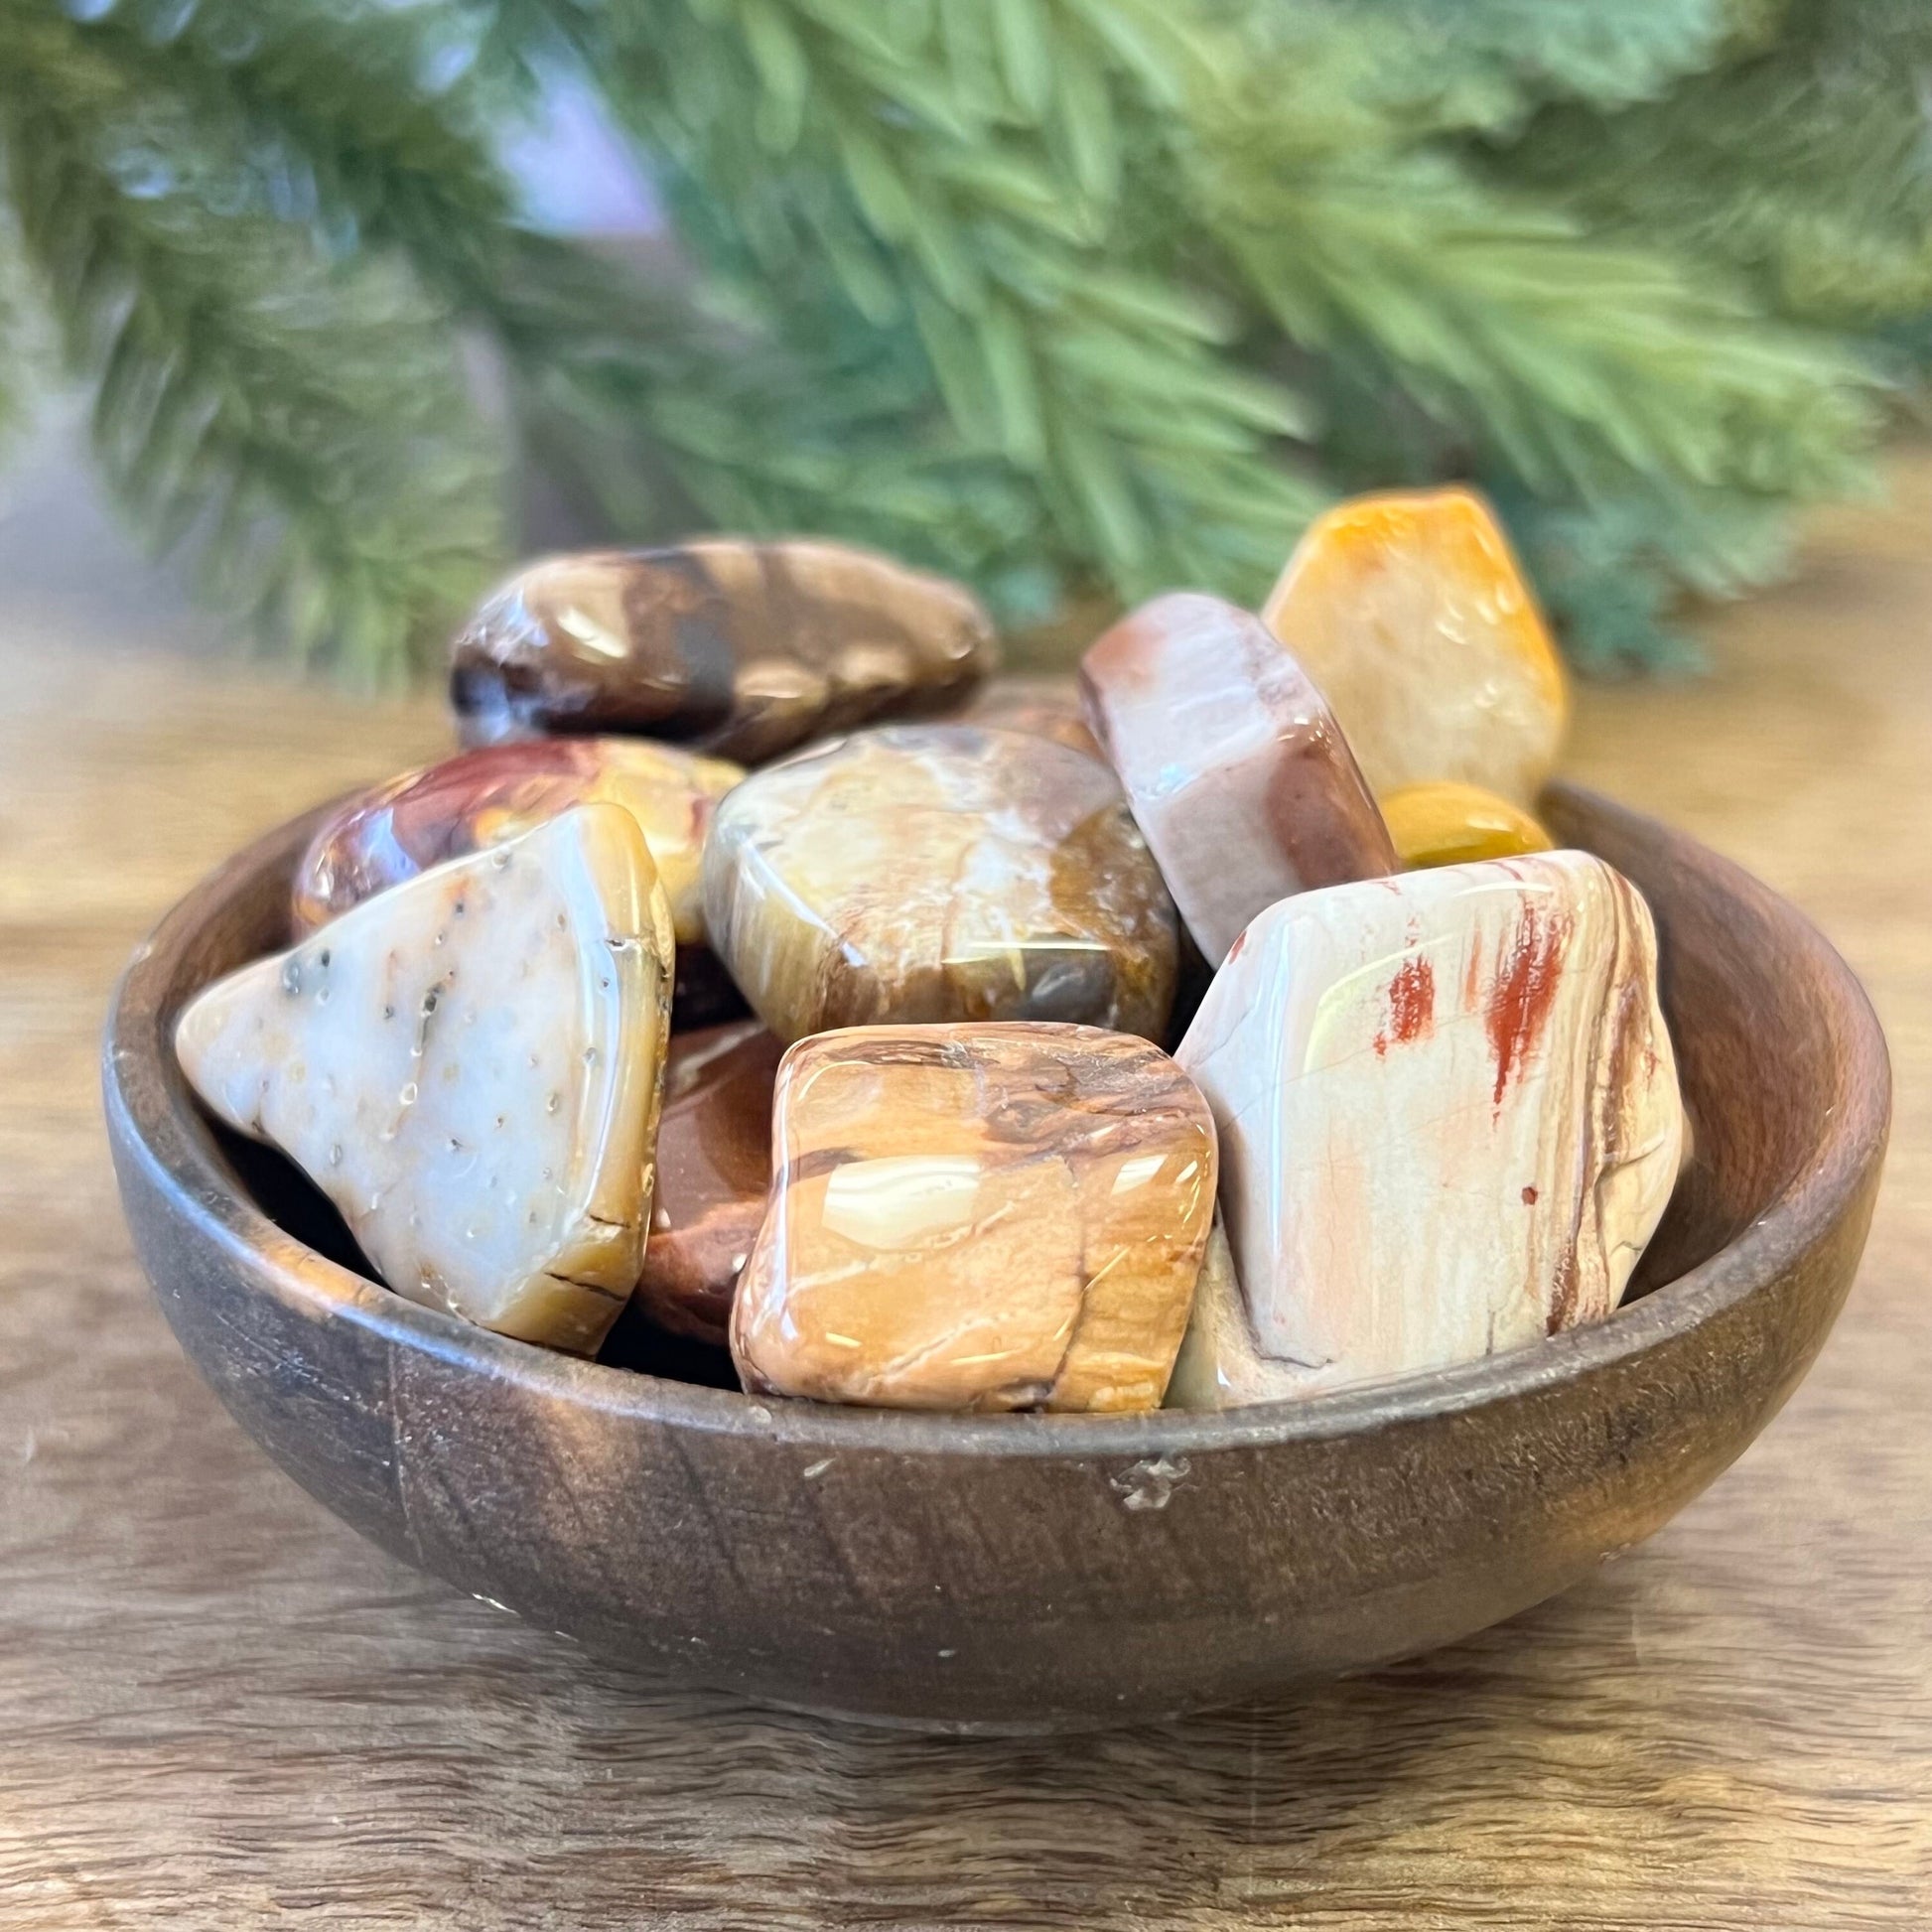 a group of colorful petrified Wood tumbled crystals in a wooden bowl